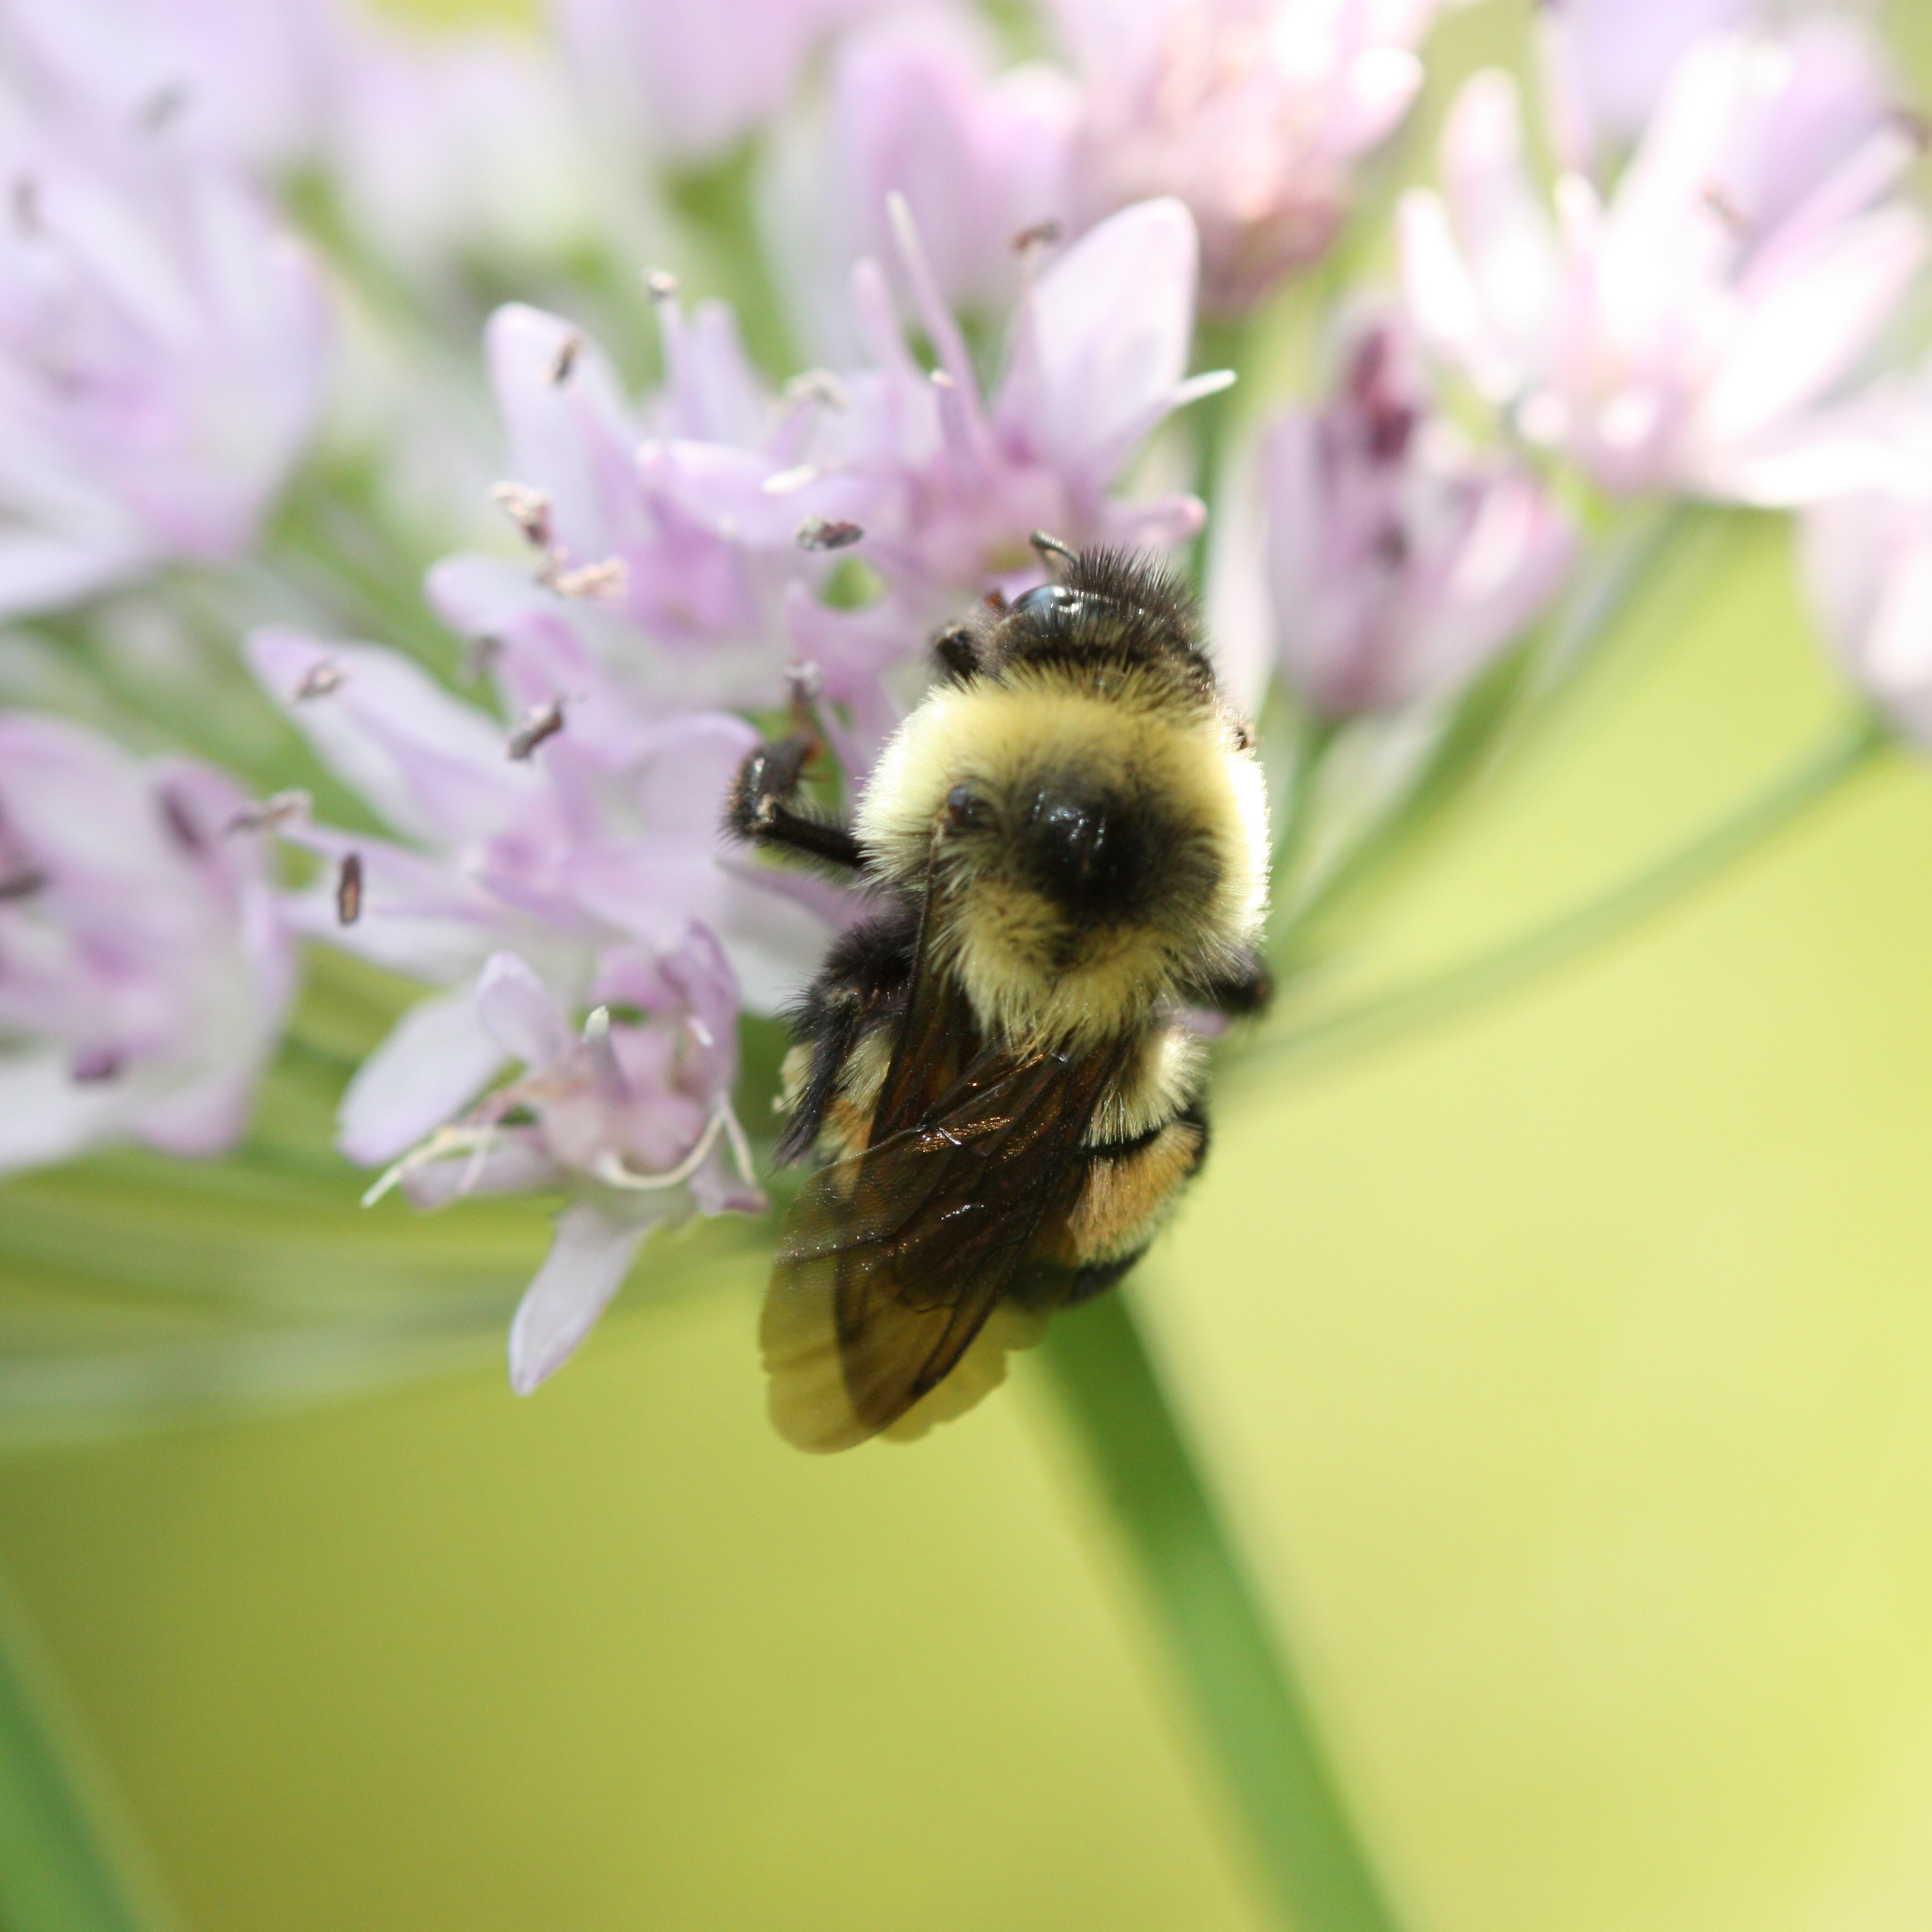 A fuzzy, black and yellow bumble bee with a reddish-brown patch on its back clings to a cluster of pale purple flowers.